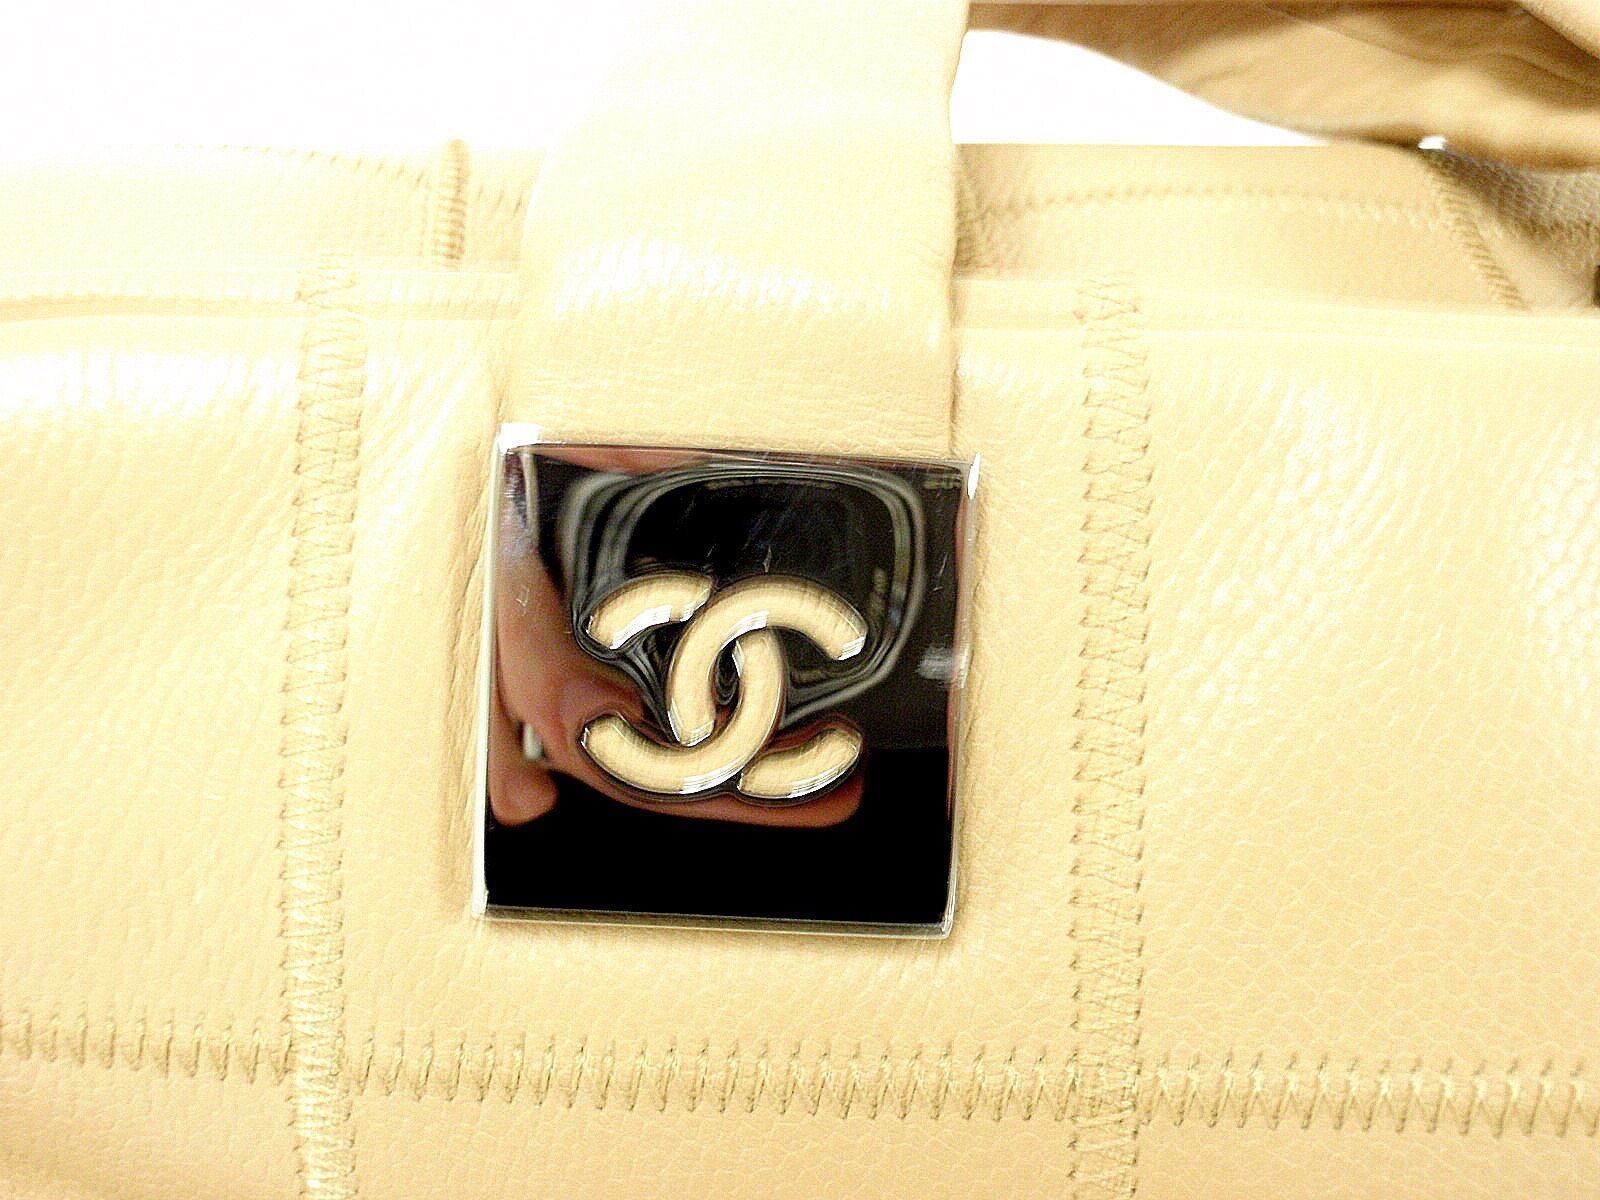 CHANEL Classic Jumbo Double Flap Quilted Caviar Leather Shoulder Bag B